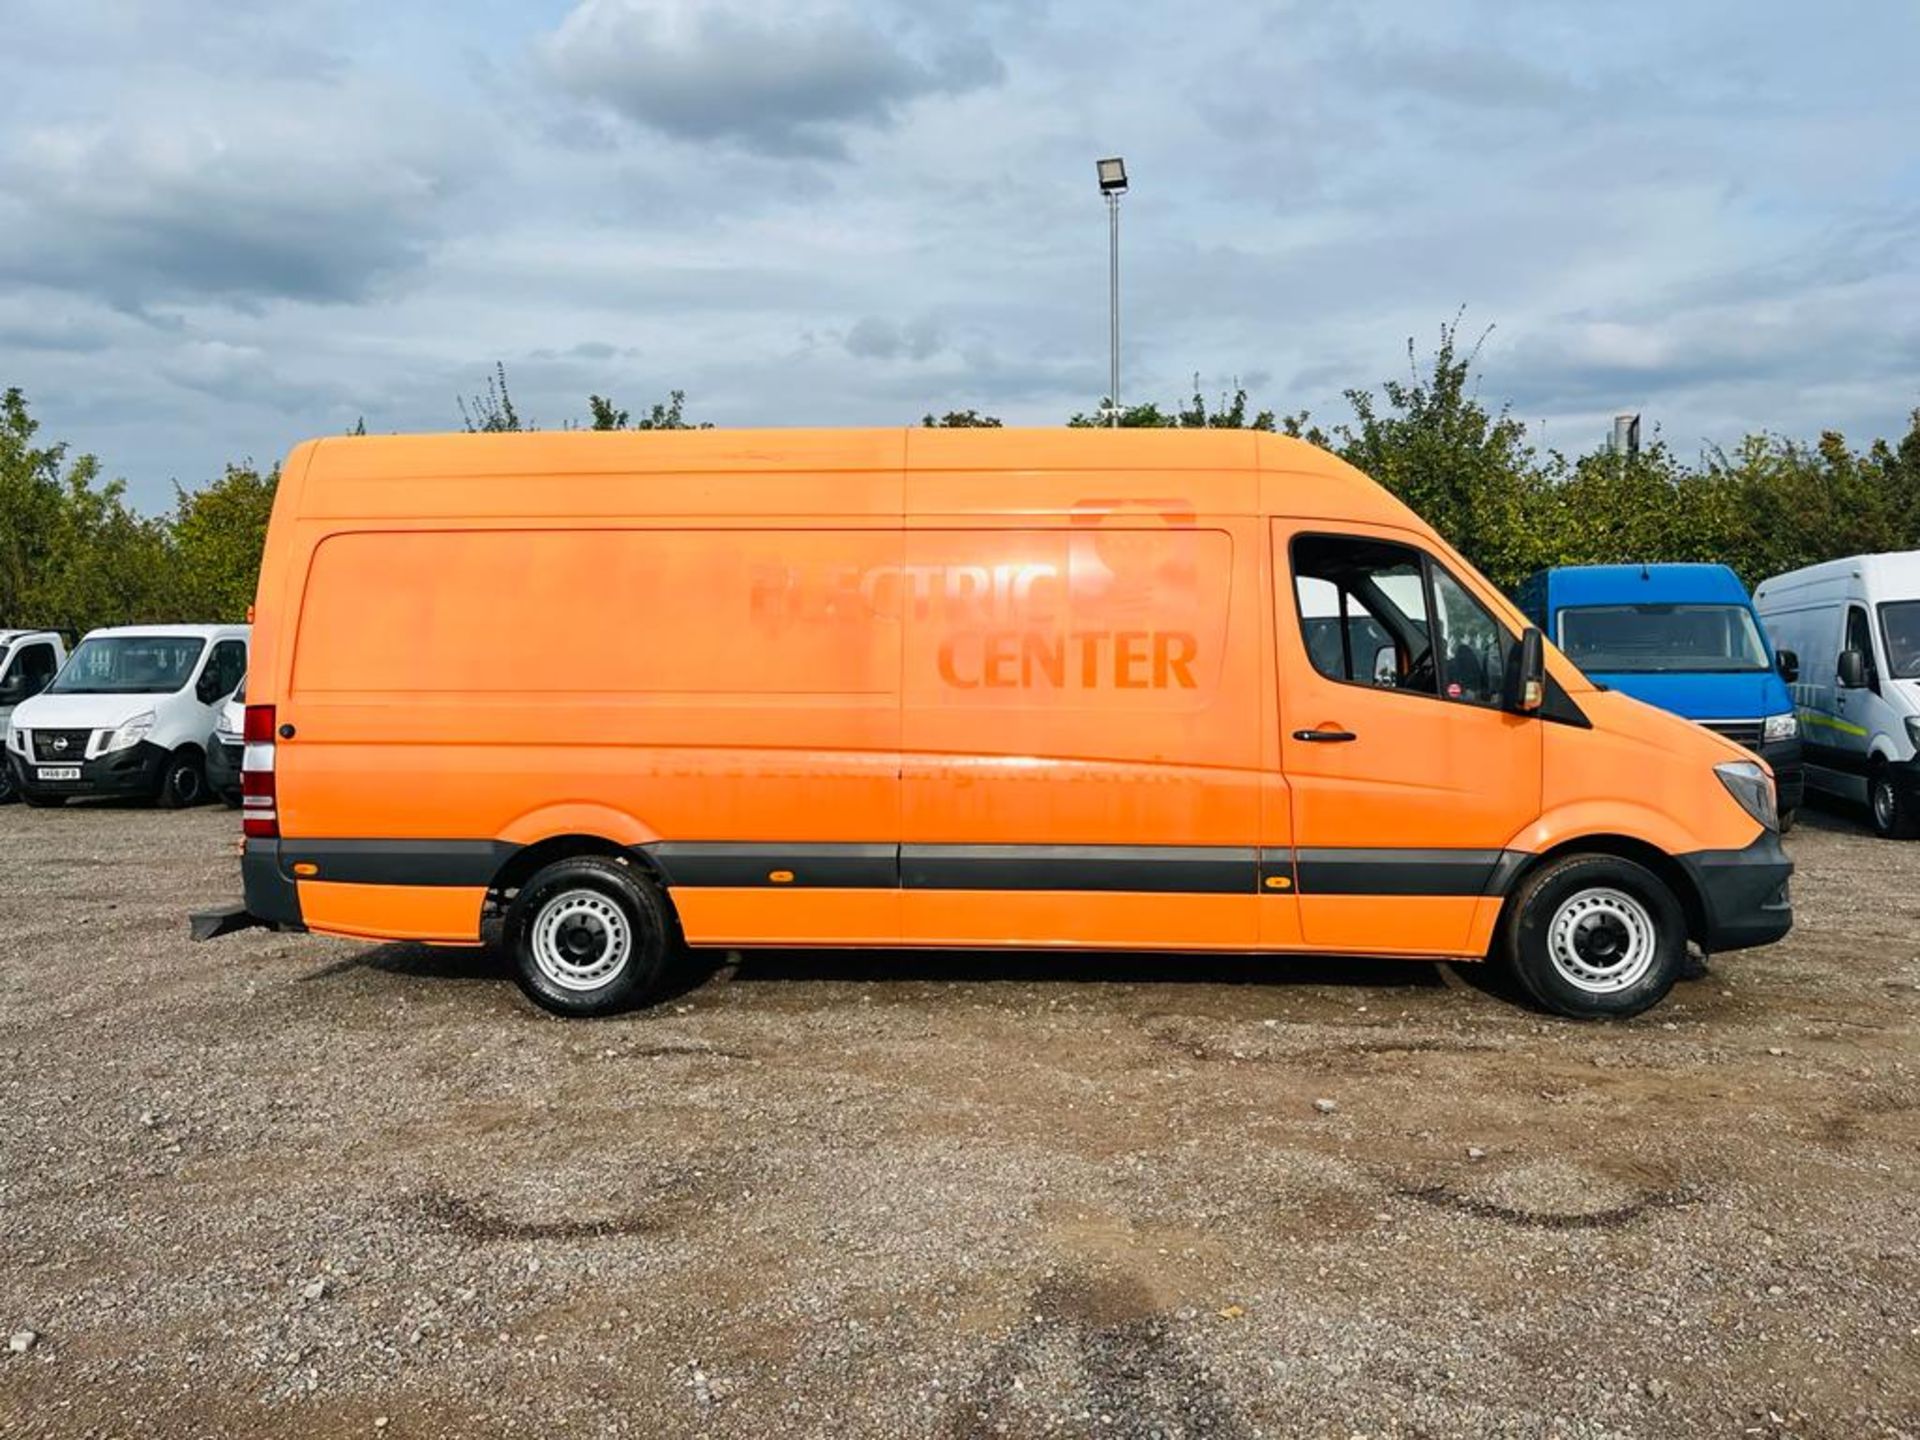 Mercedes Benz Sprinter 2.1 313 CDI 2015 '15 Reg' L3 H3 - Panel Van - One Owner from new - Image 14 of 27